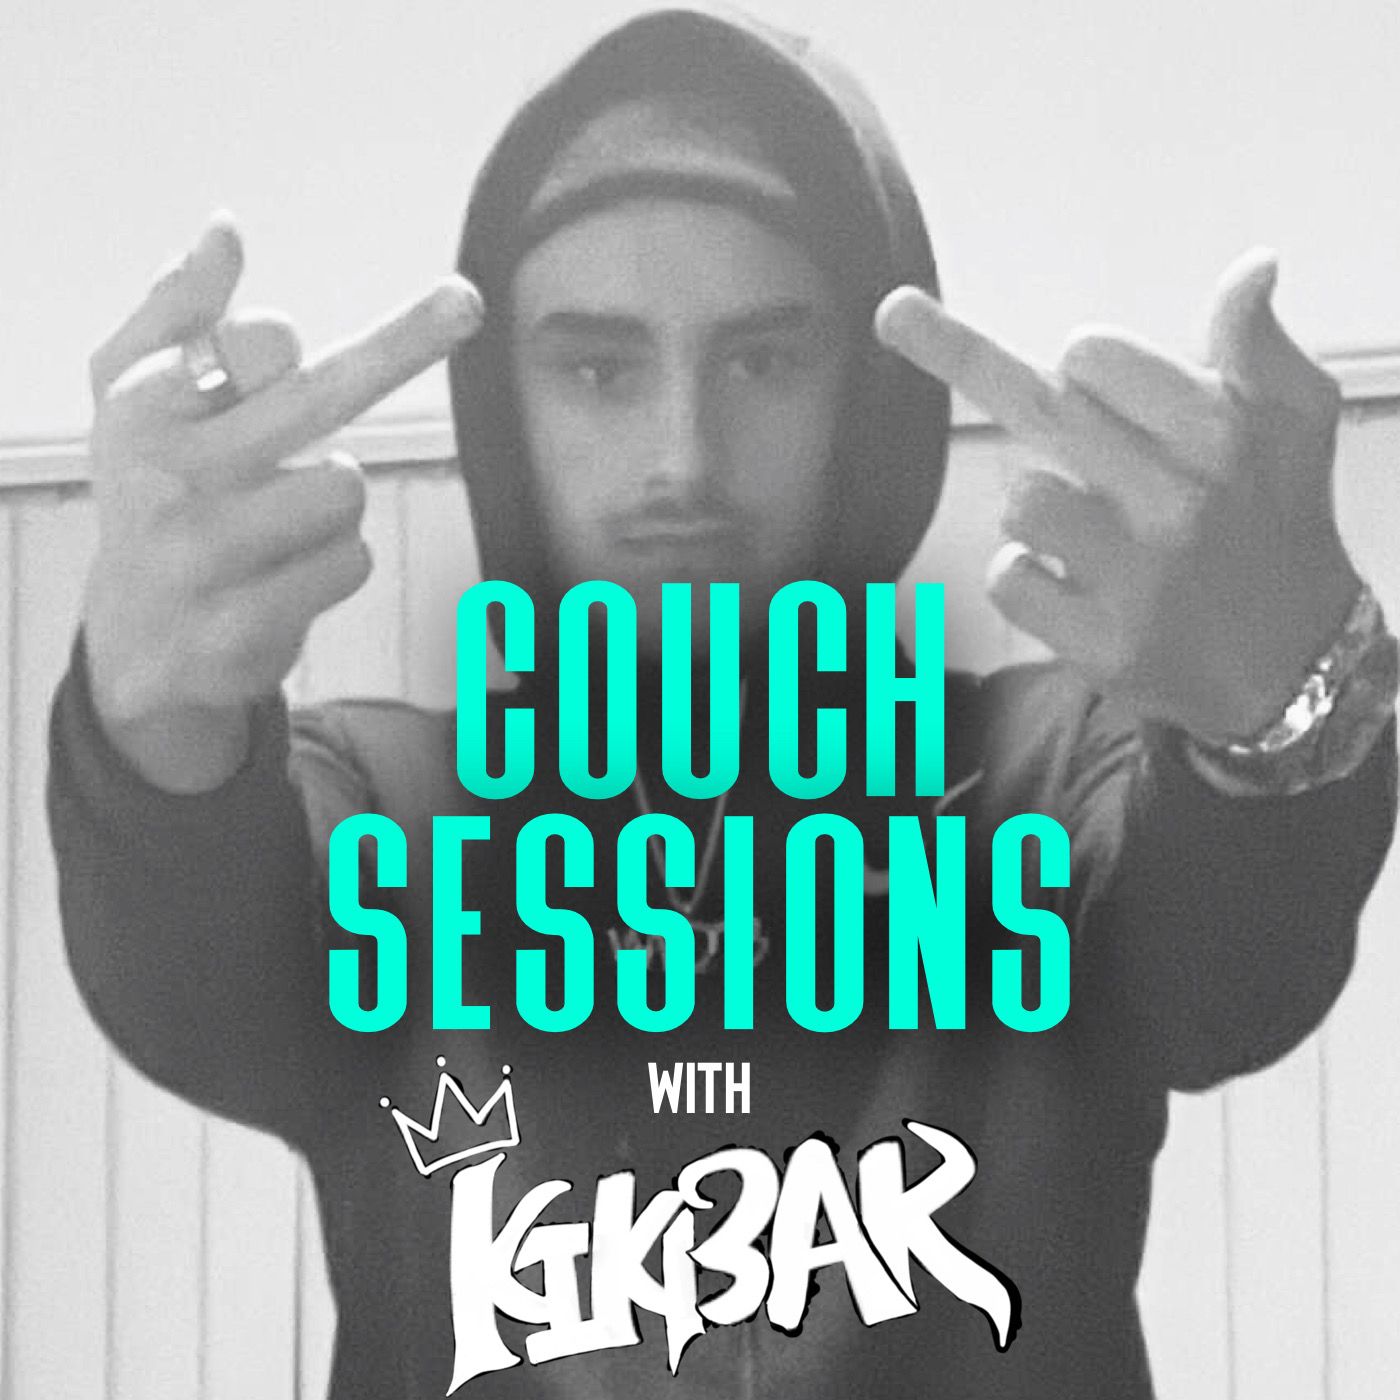 COUCH SESSIONS Episode #26 with Kikbak